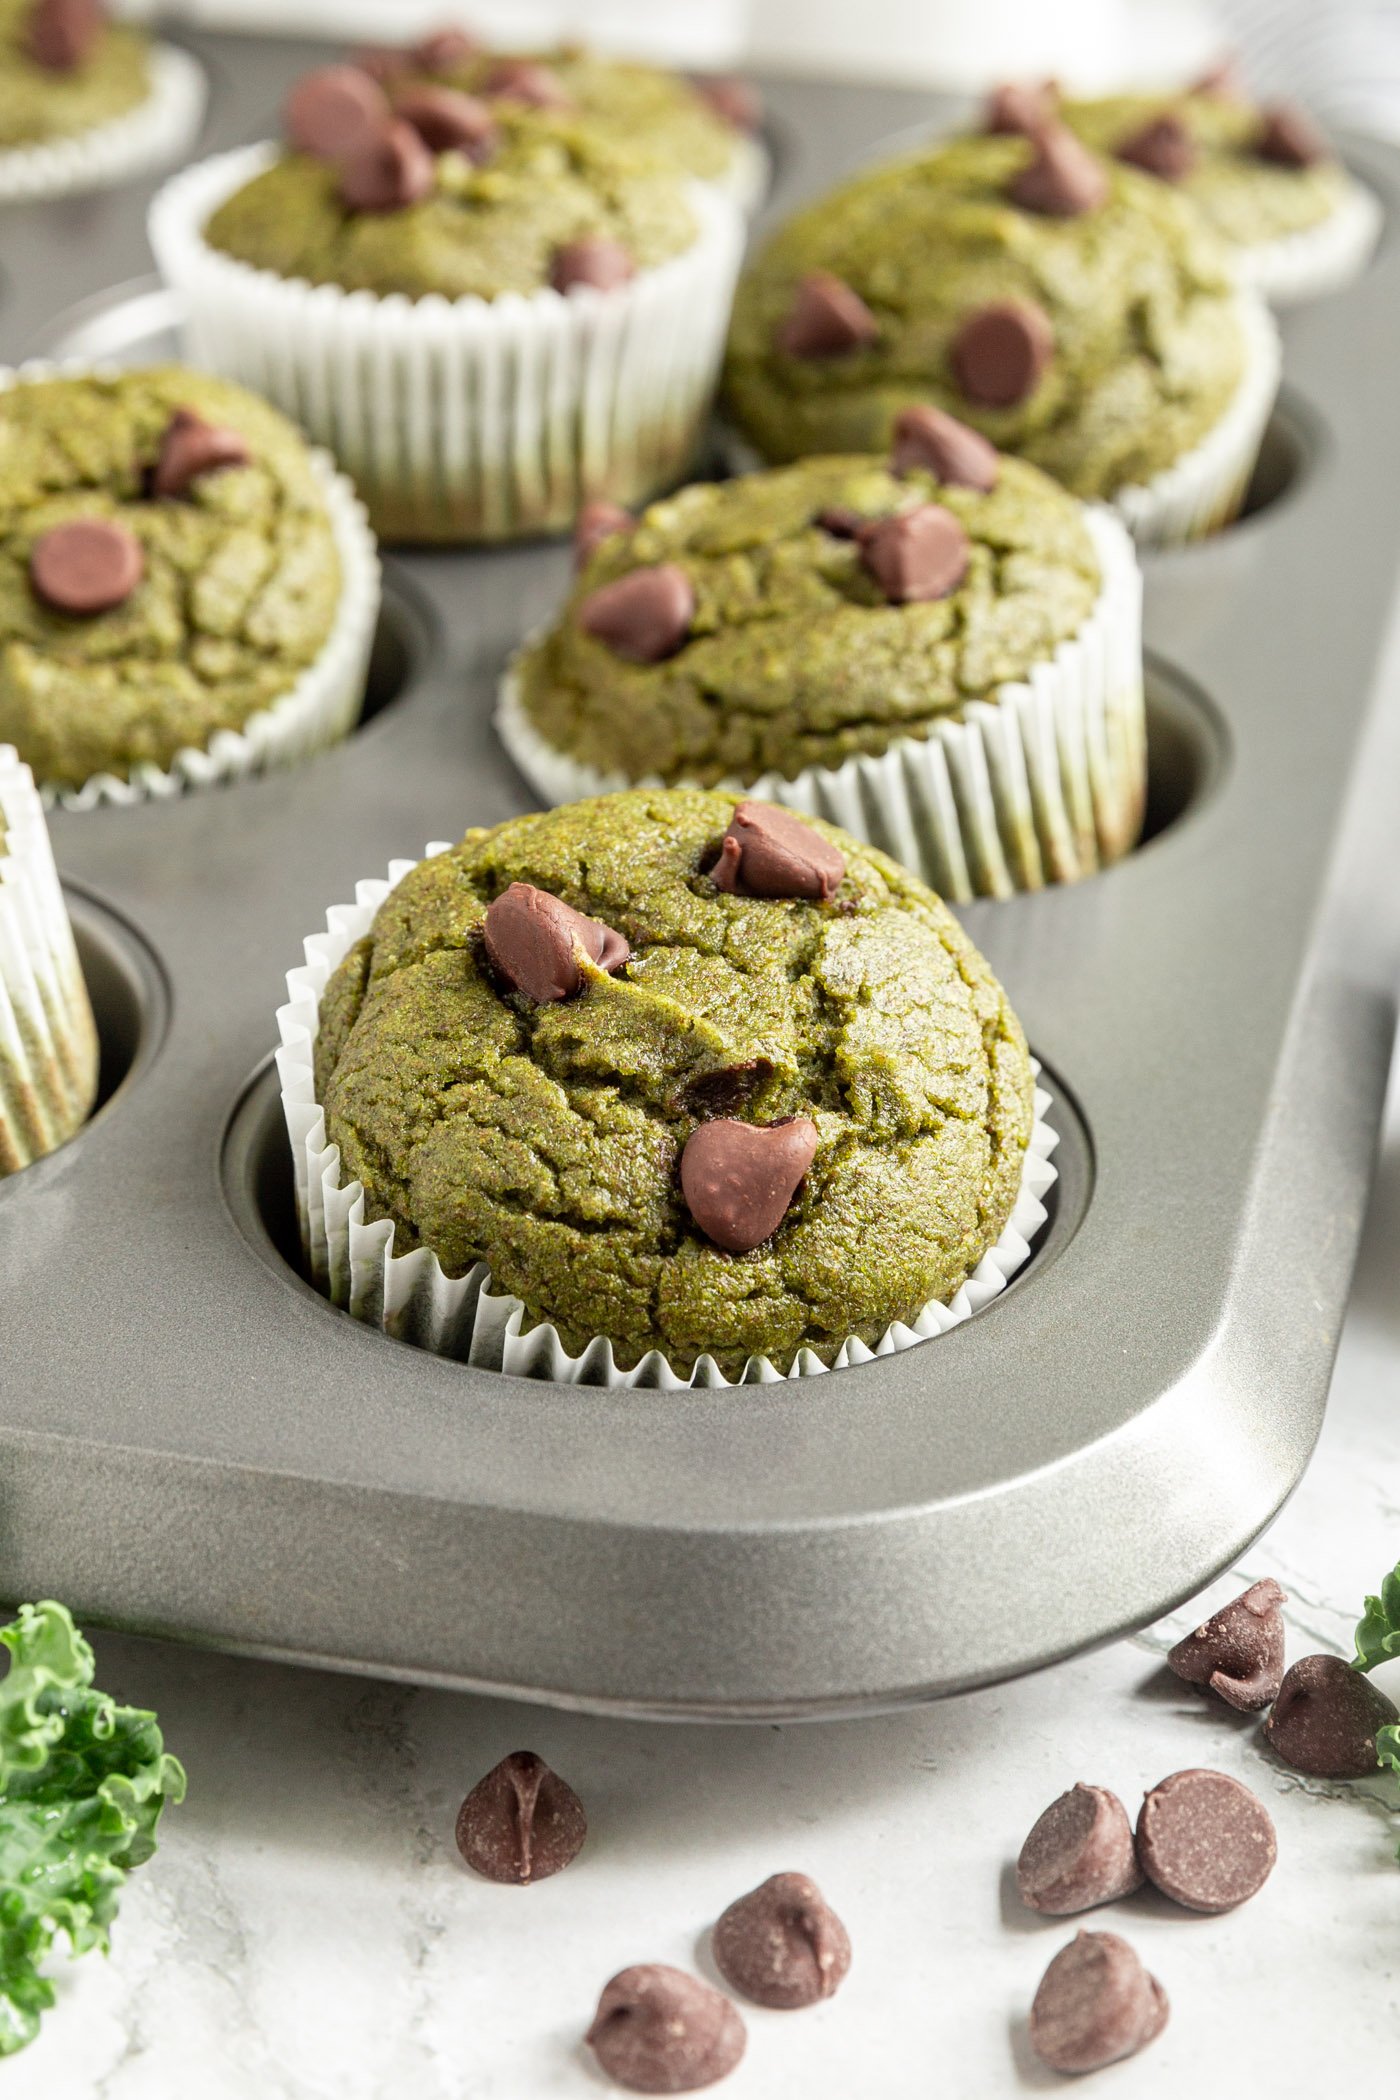 Baked kale muffins in a muffin tin on a table. There are chocolate chips scattered around the tin on the table.